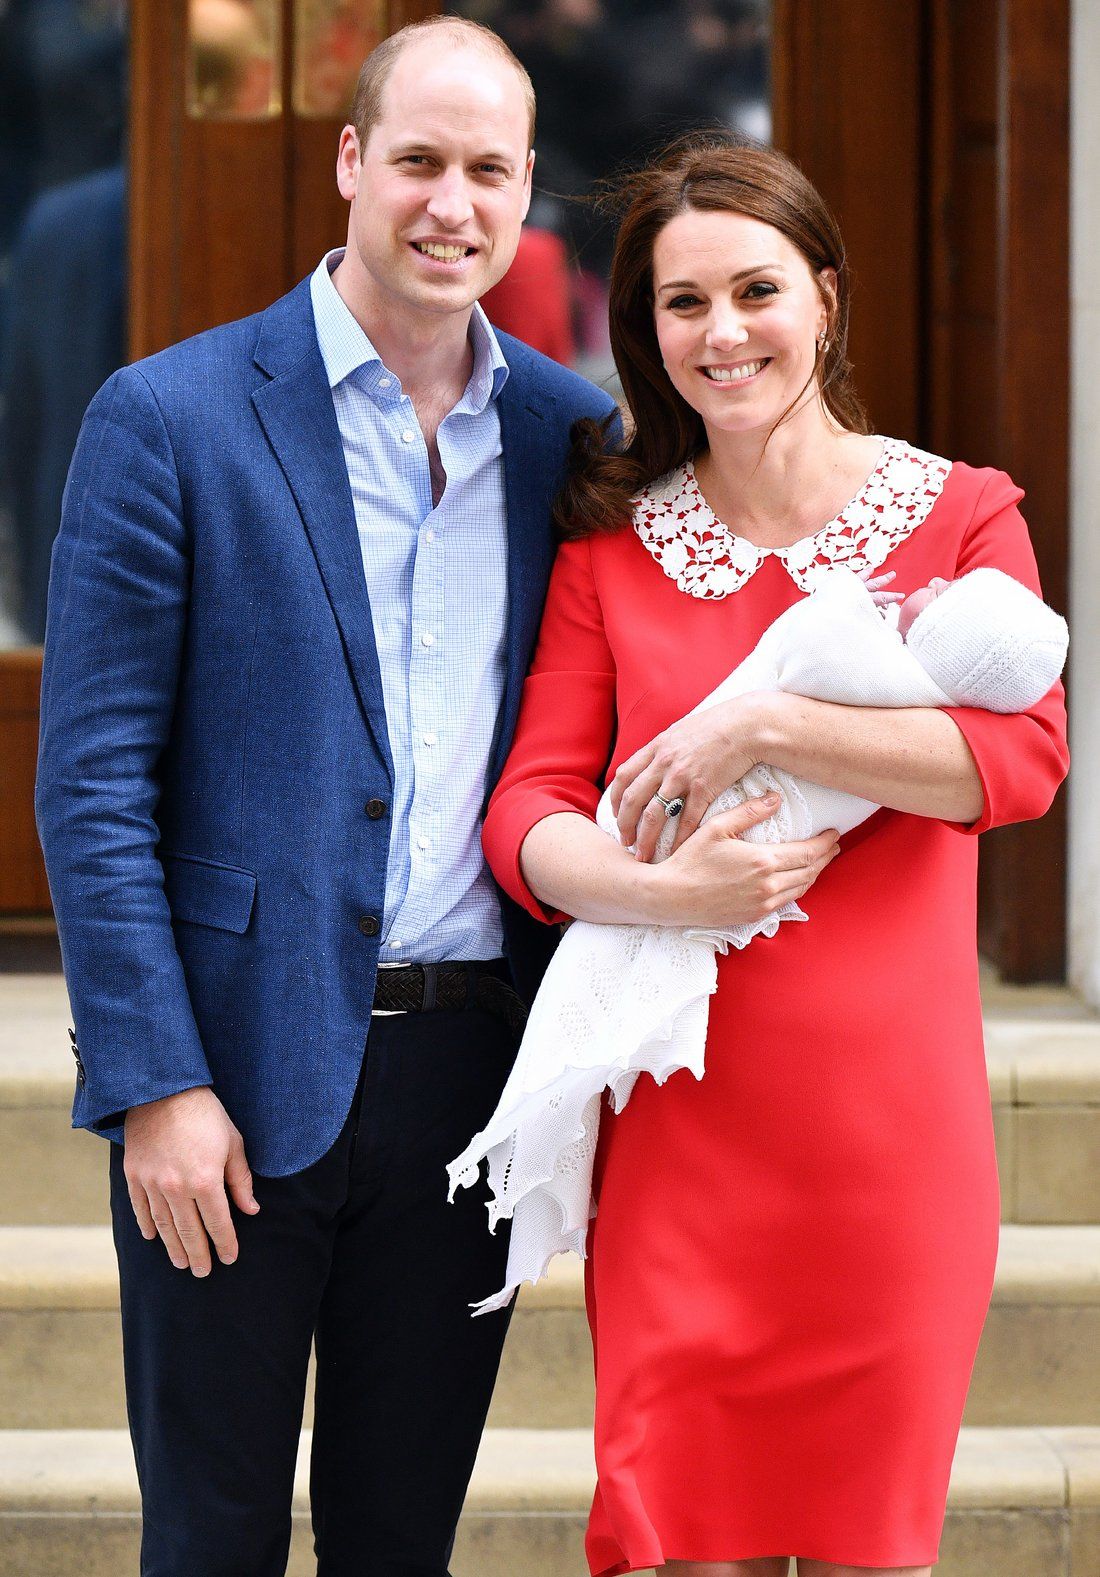 Prince William, Kate Middleton and their newborn son